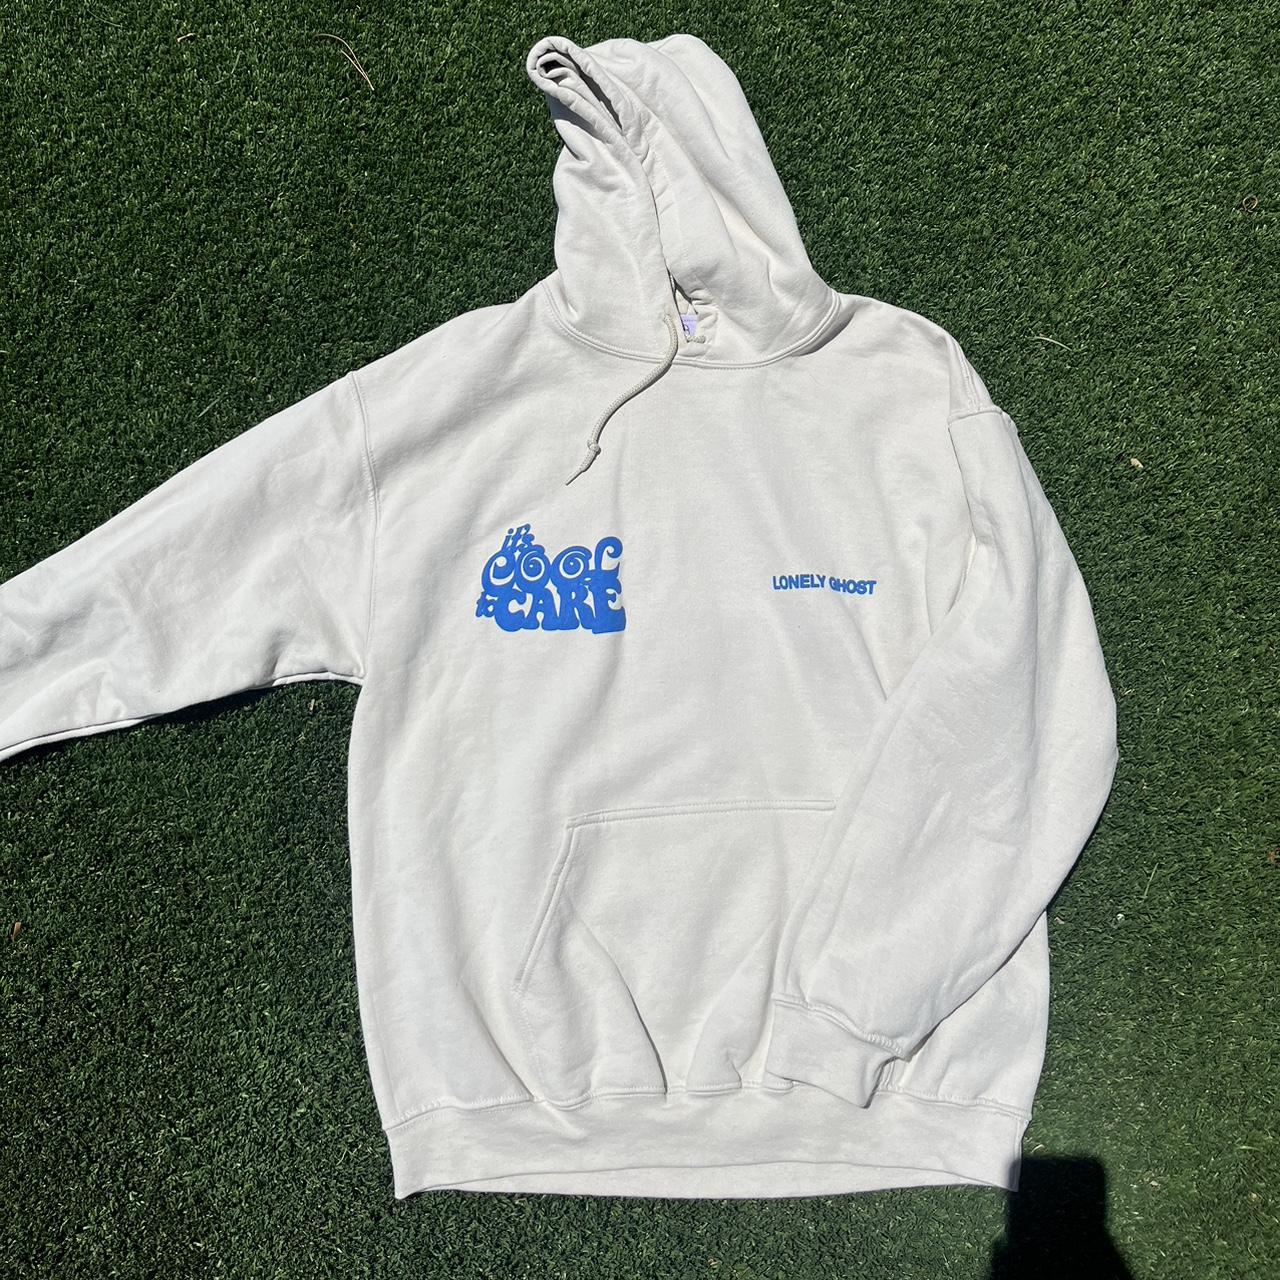 Lonely Ghost It’s cool to care hoodie - Depop